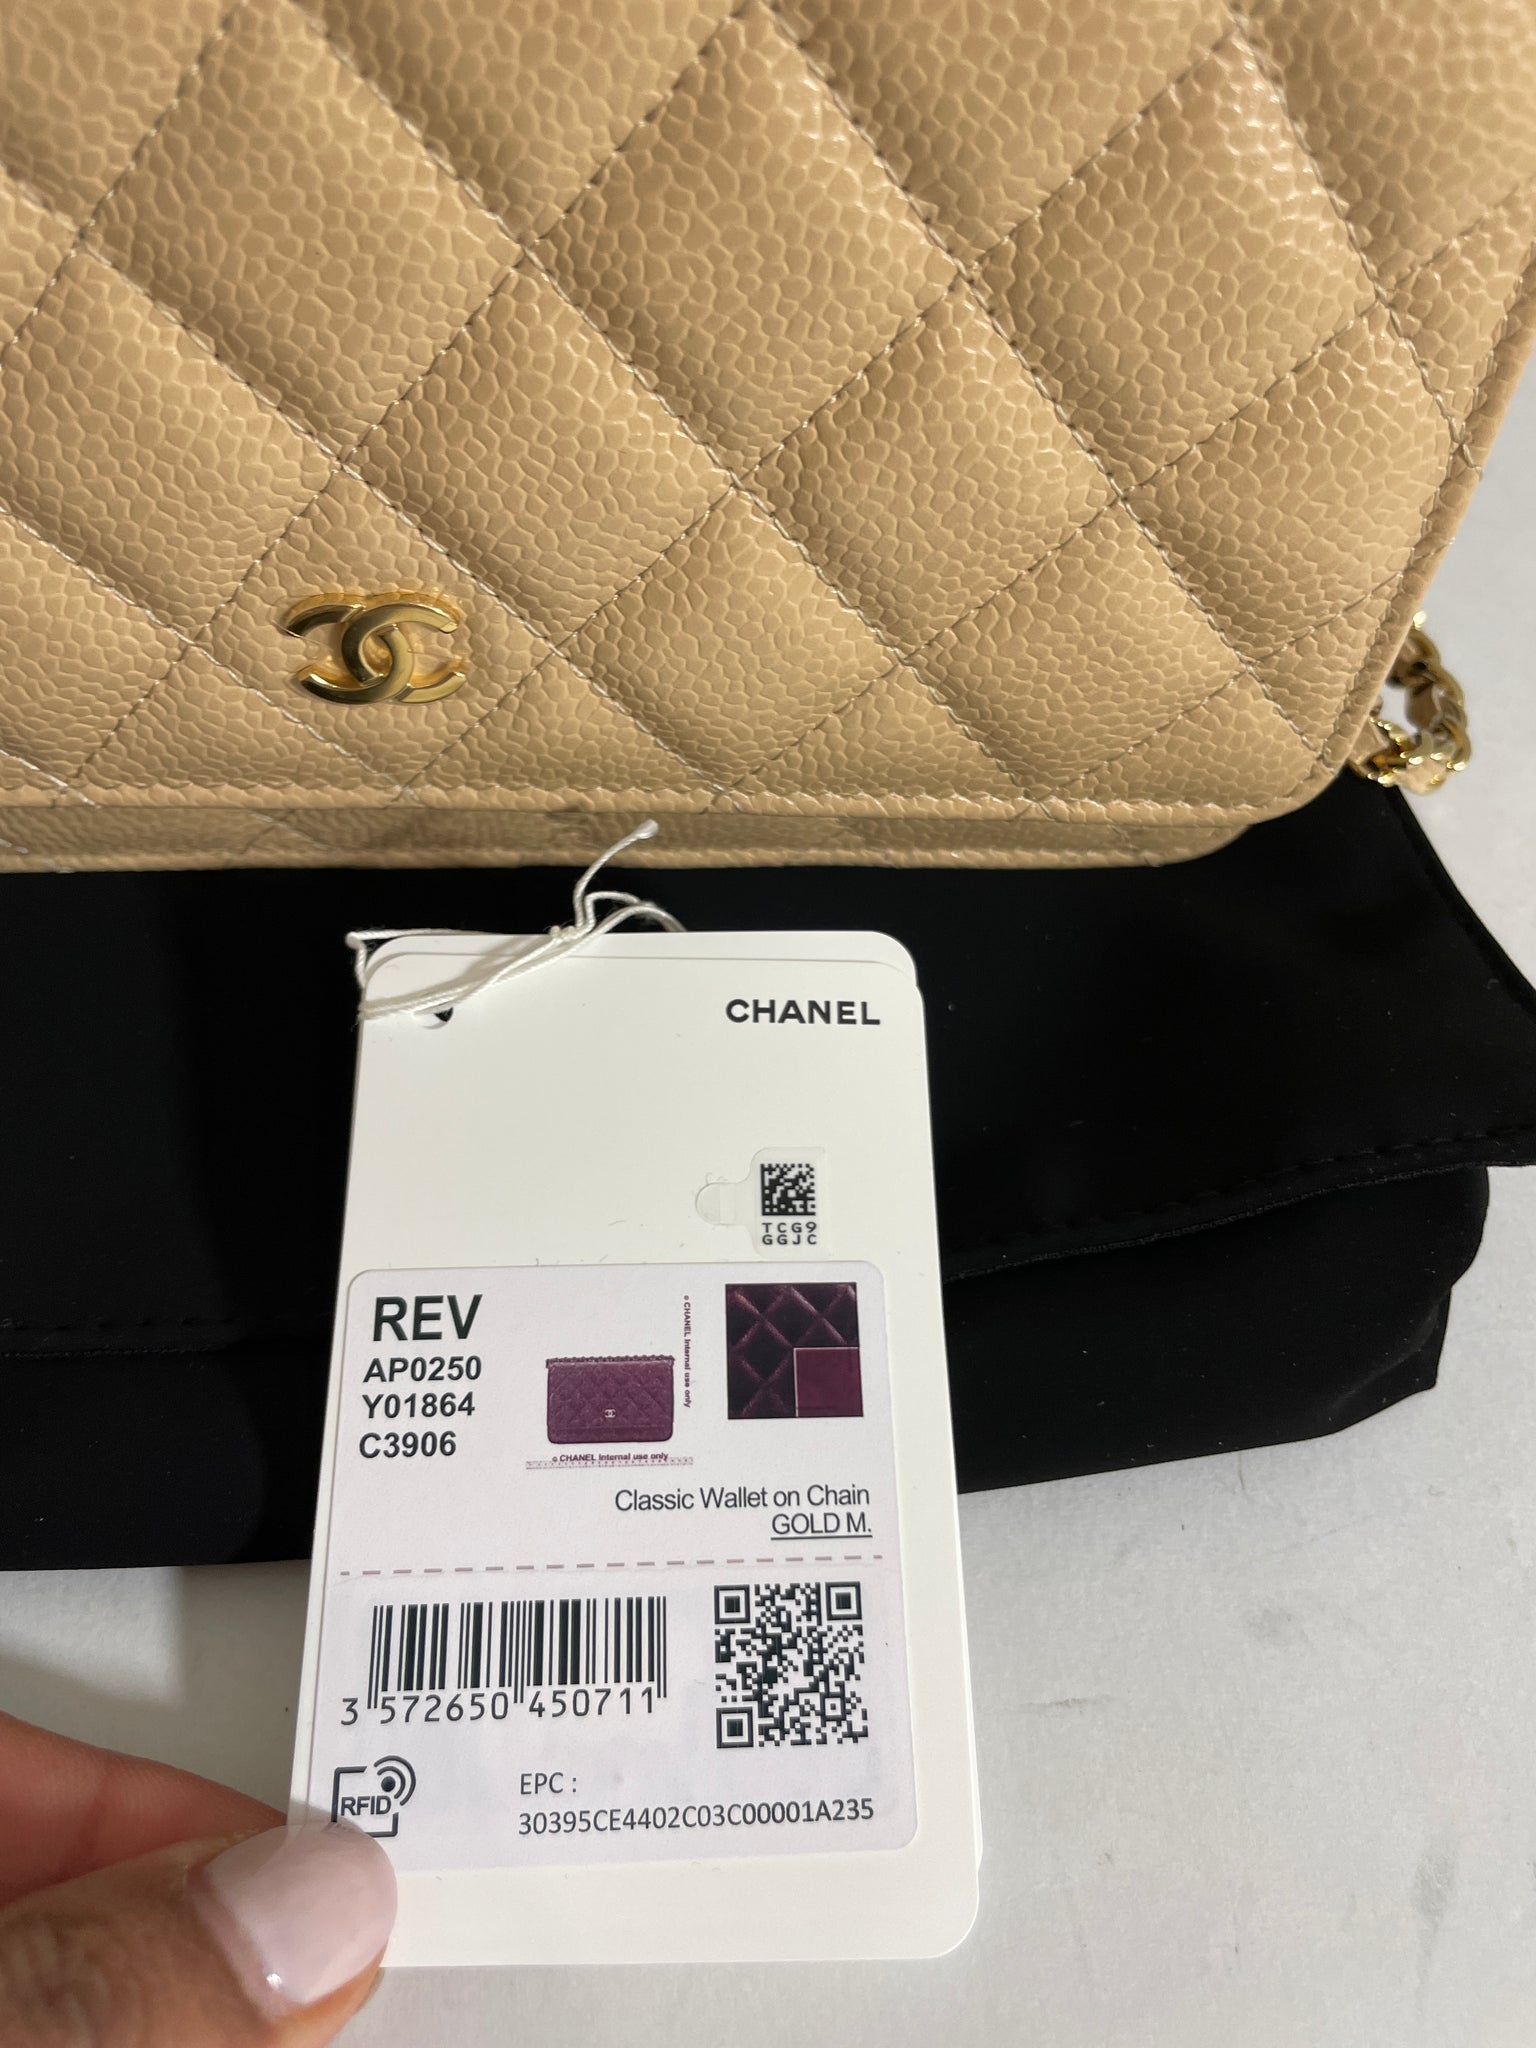 Chanel Timeless Wallet on Chain Caviar Cc Flap 233989 Beige